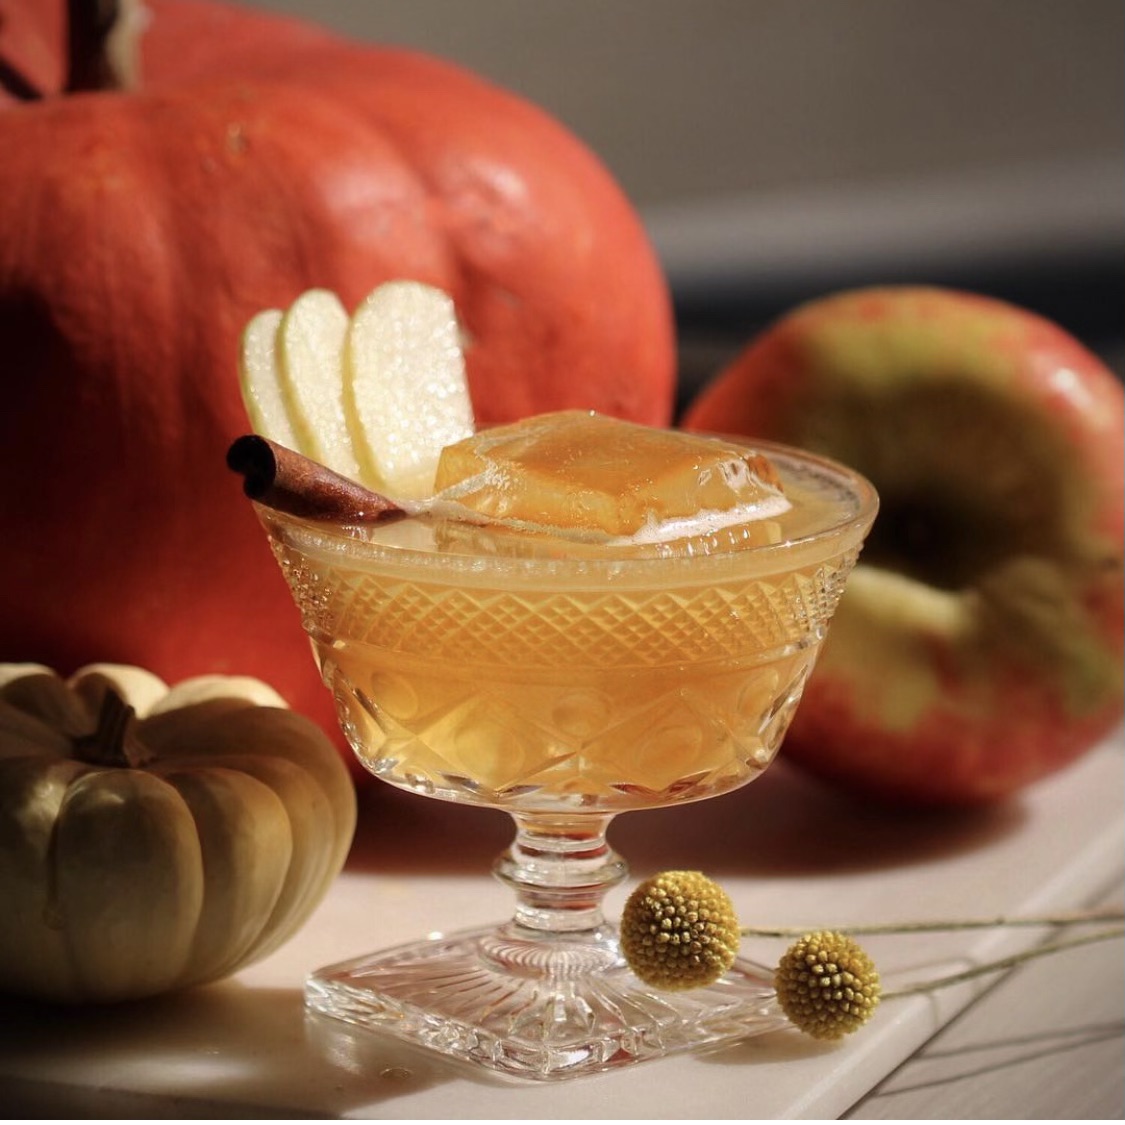 10 Easy Big-Batch Thanksgiving Cocktails - Sugar and Spice